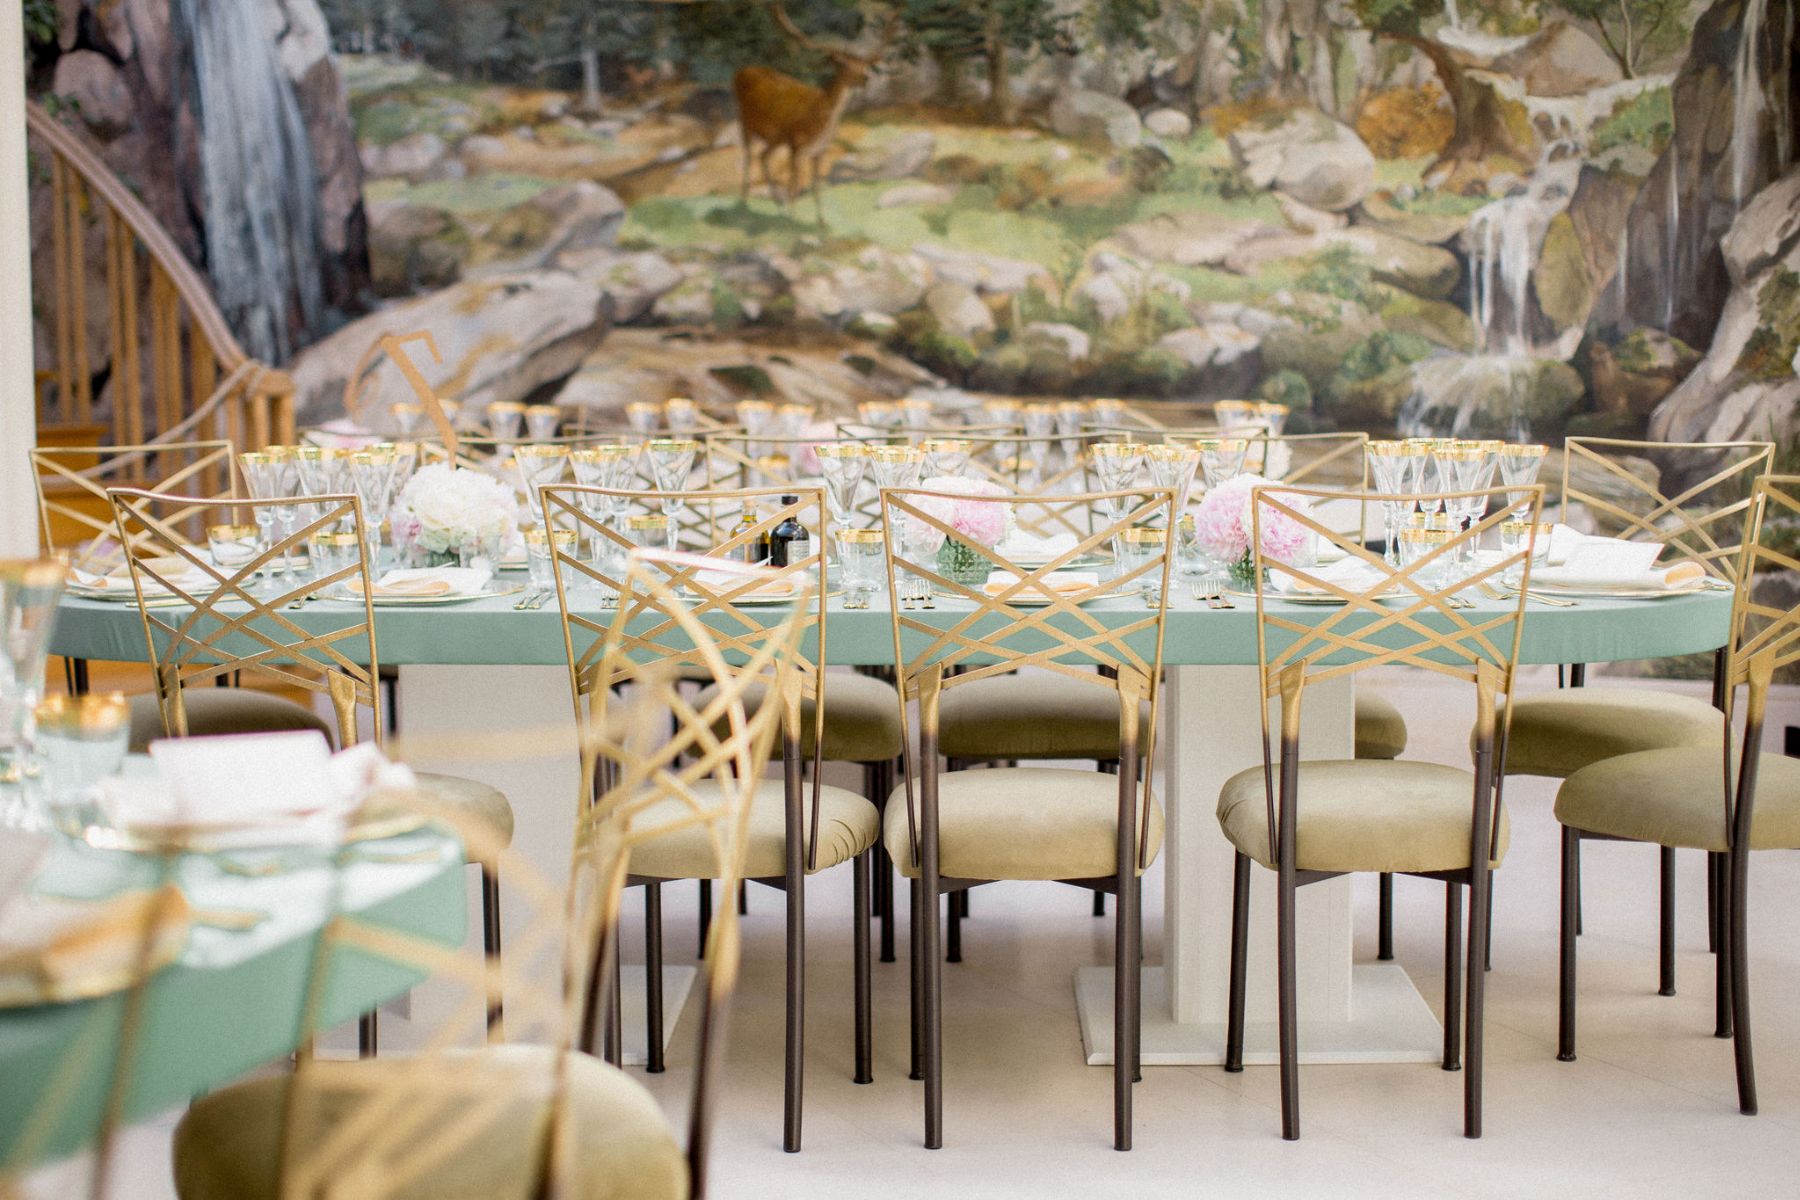 Reception and table-settings in front of ornate mural.